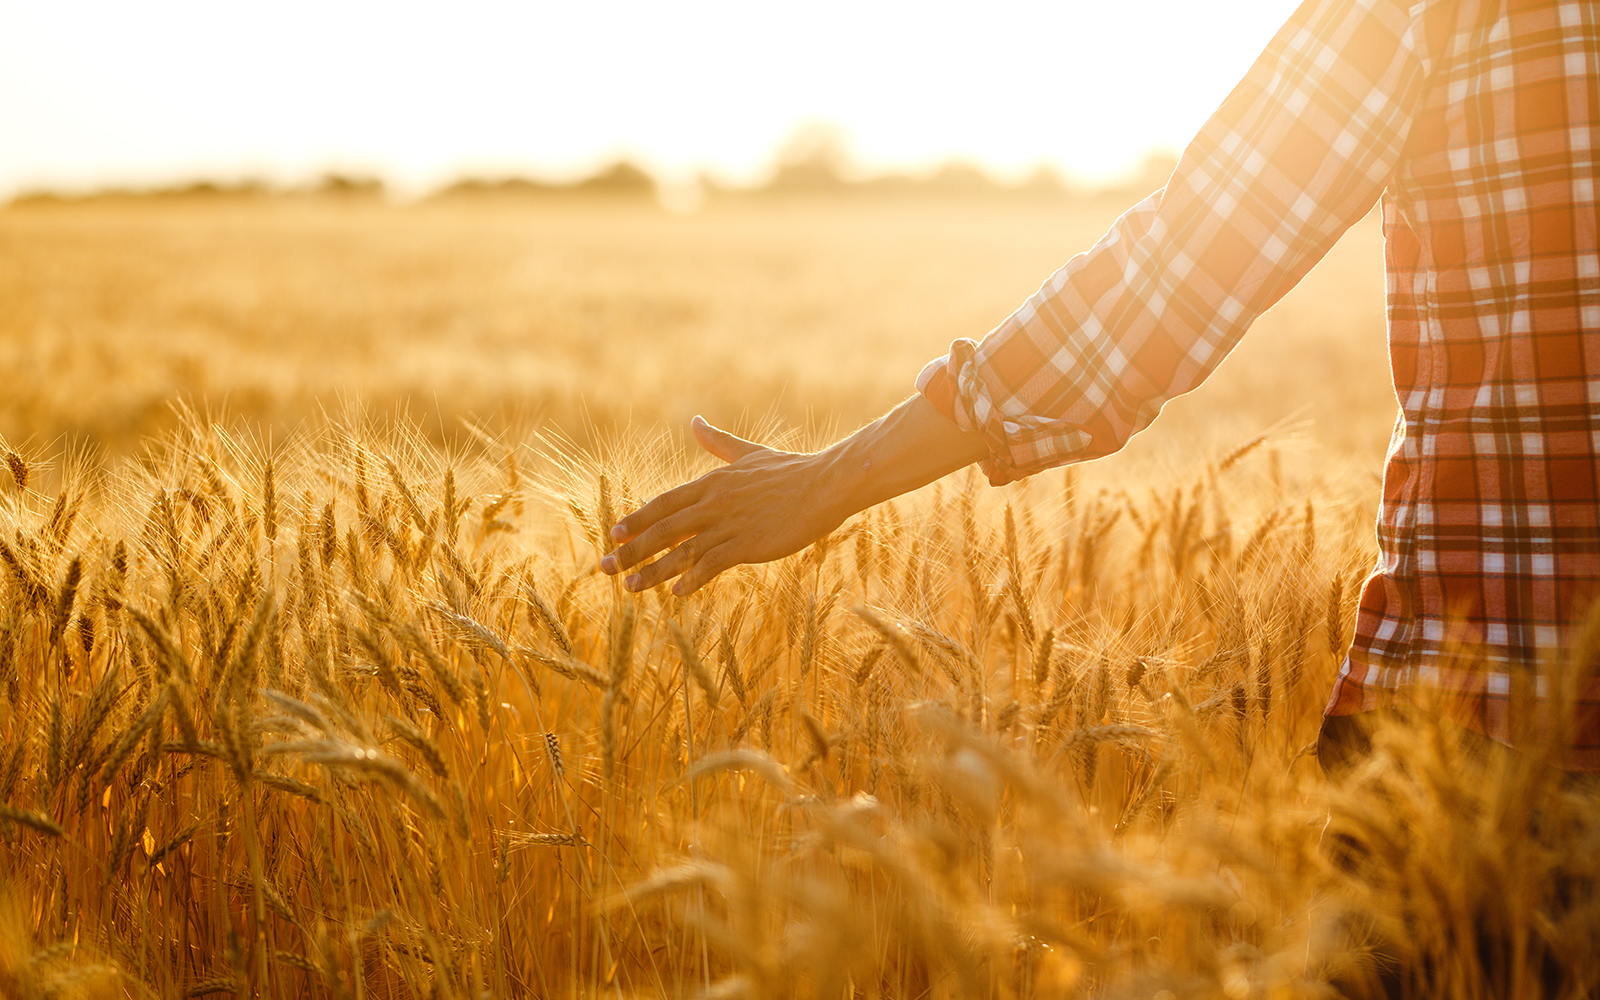 Close up of a persons hand walking through a wheat field